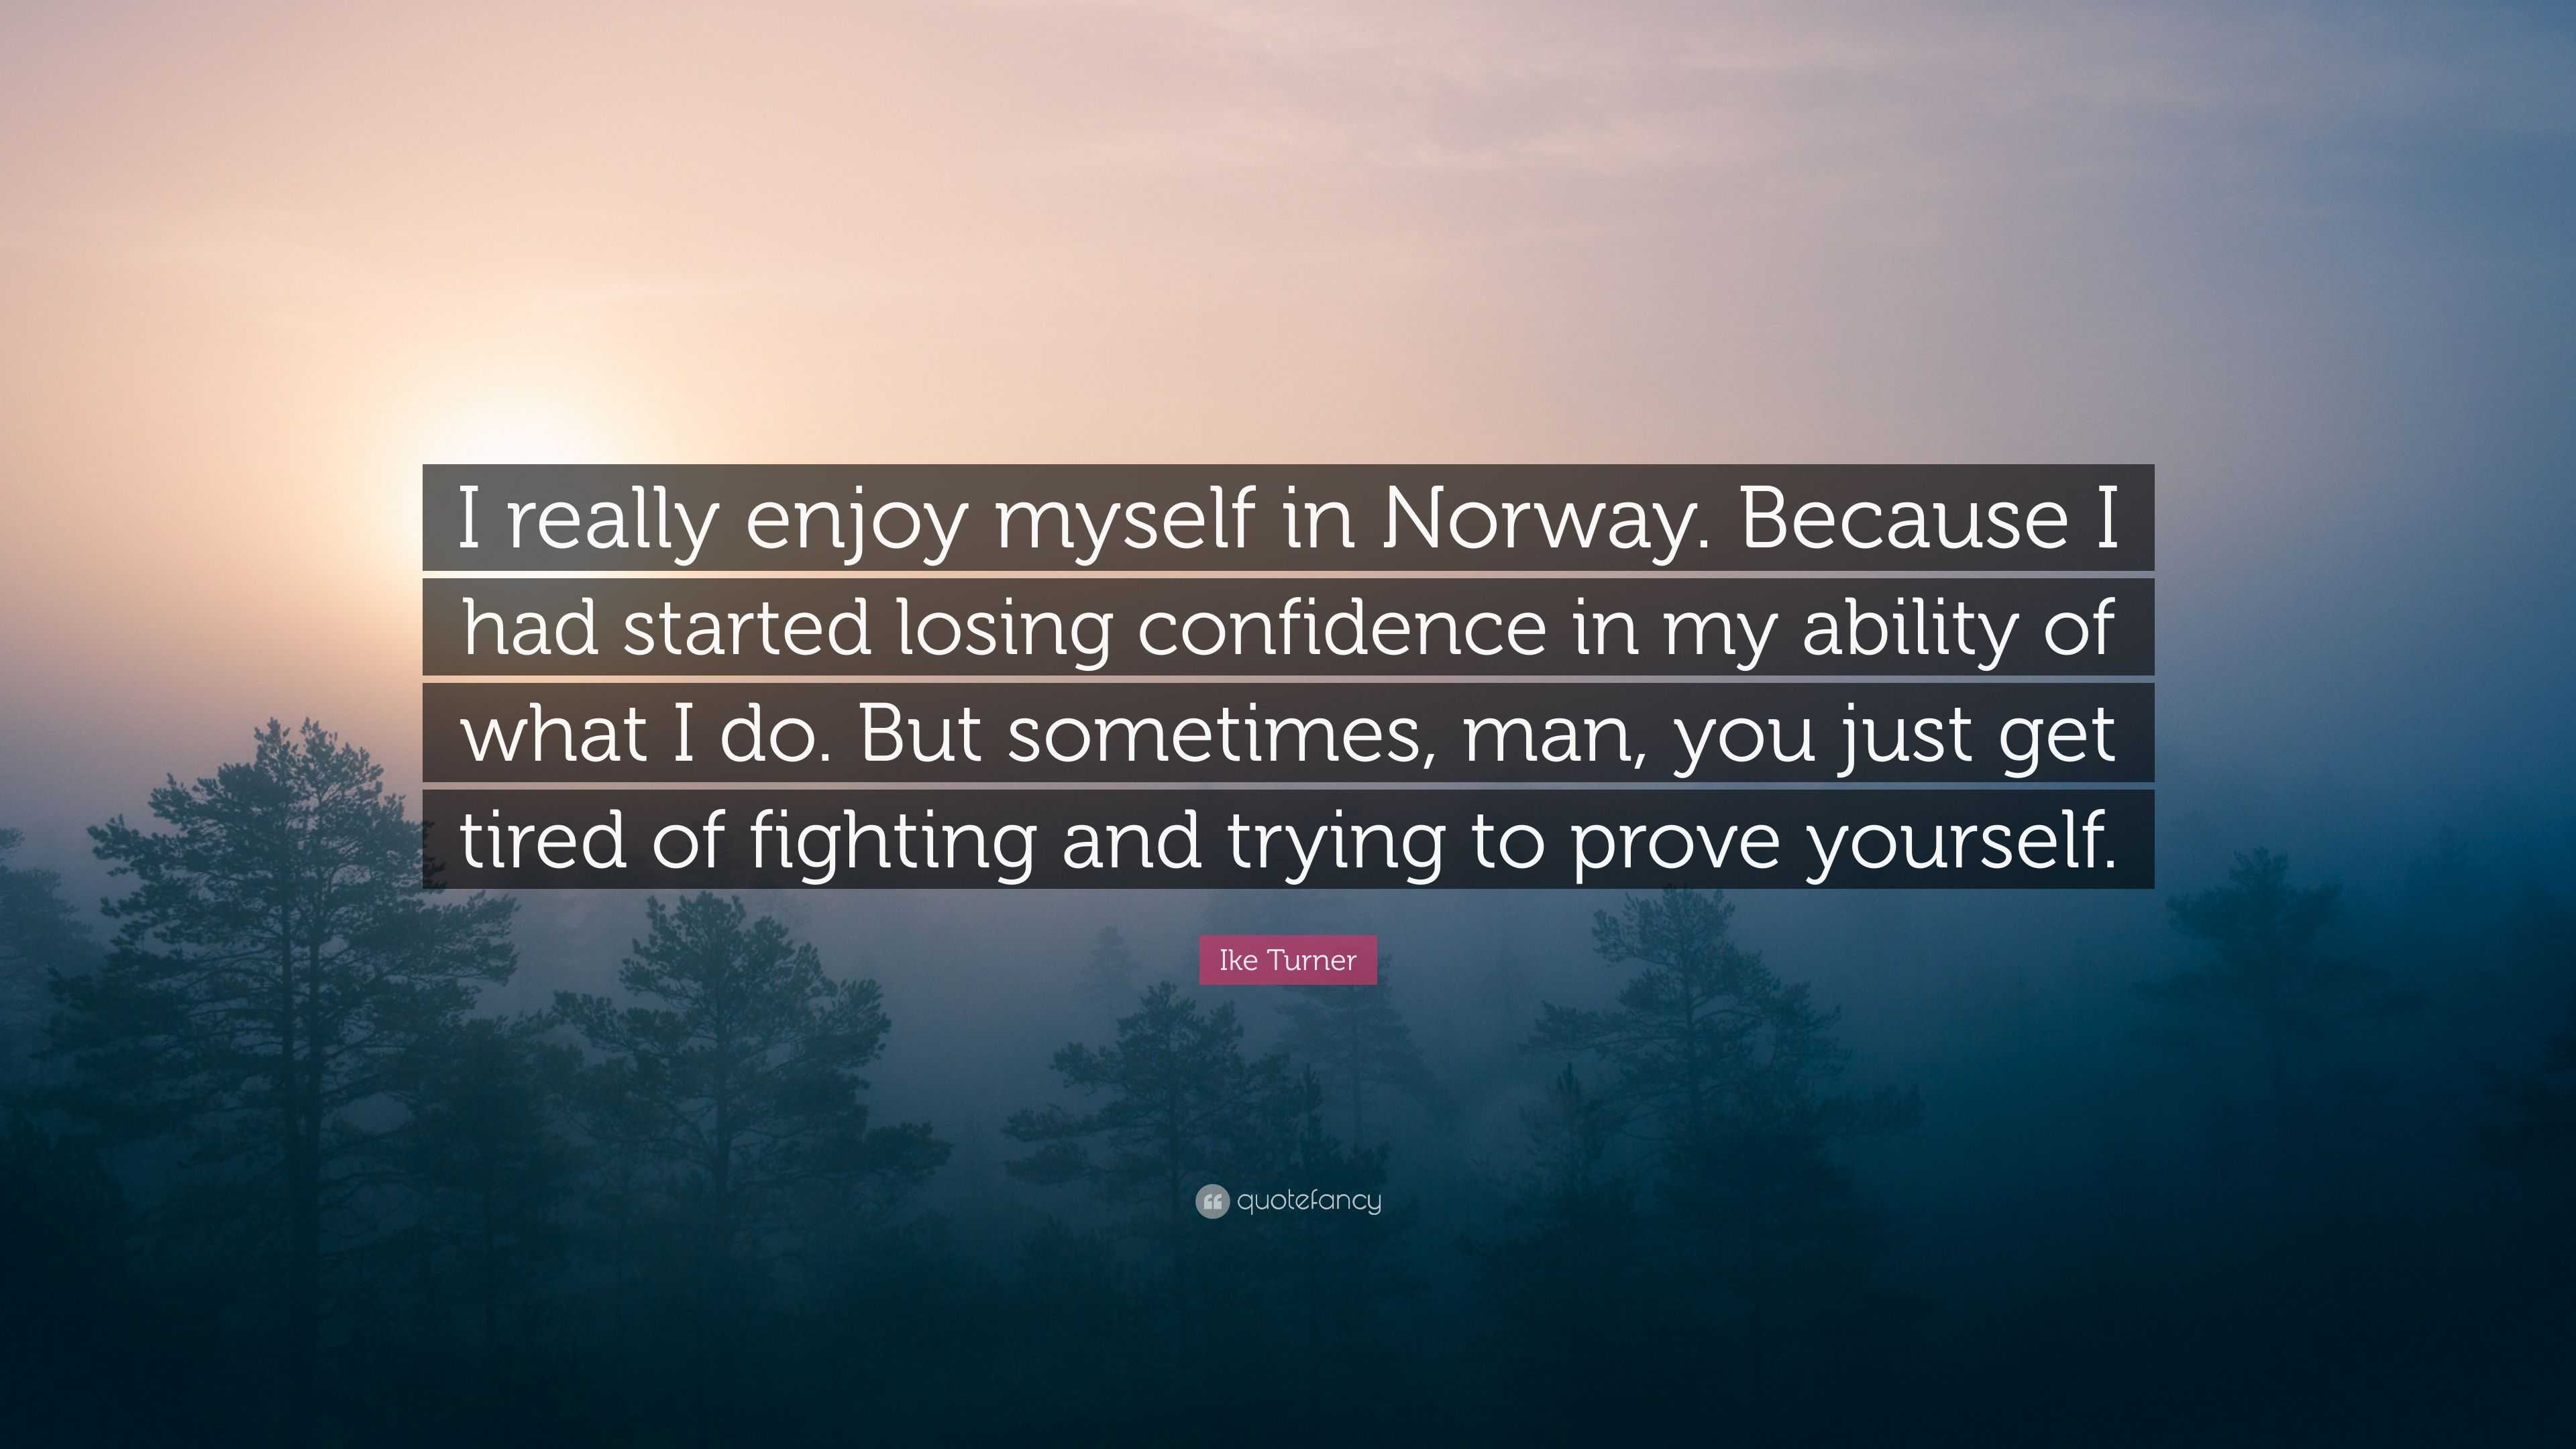 Ike Turner Quote: “I really enjoy myself in Norway. Because I had